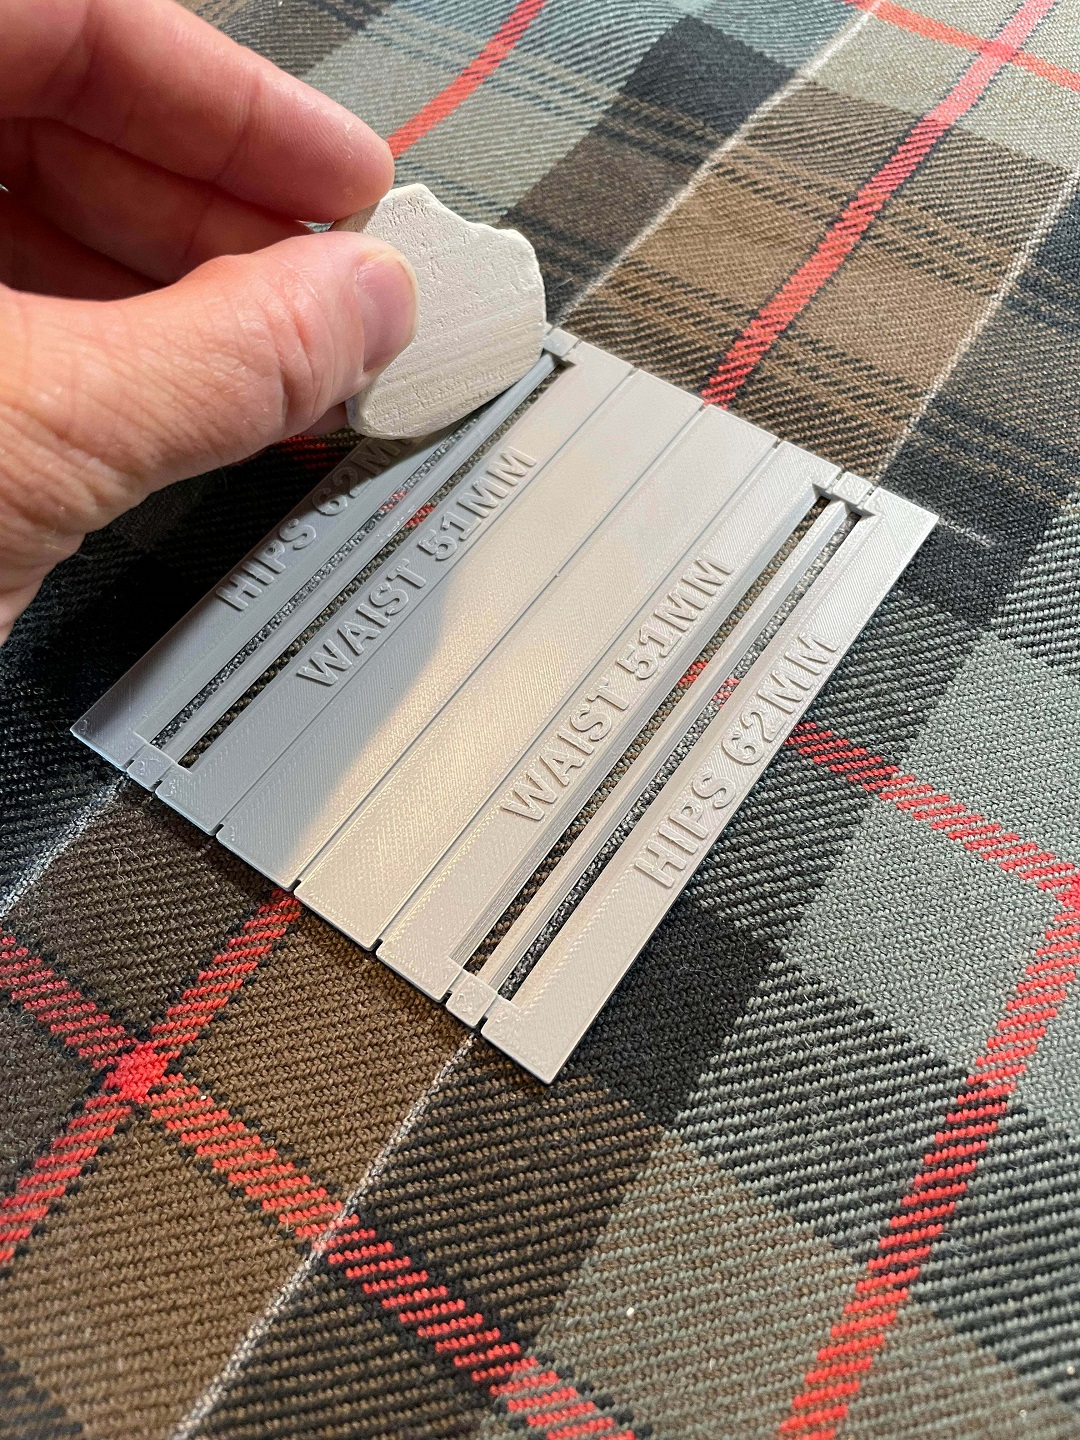 Jig For Chalking The Hip And Waist Widths For The Pleated Section Of A Kilt. It also Has Guide Lines For Accurate Alignment To The Tartan Pattern